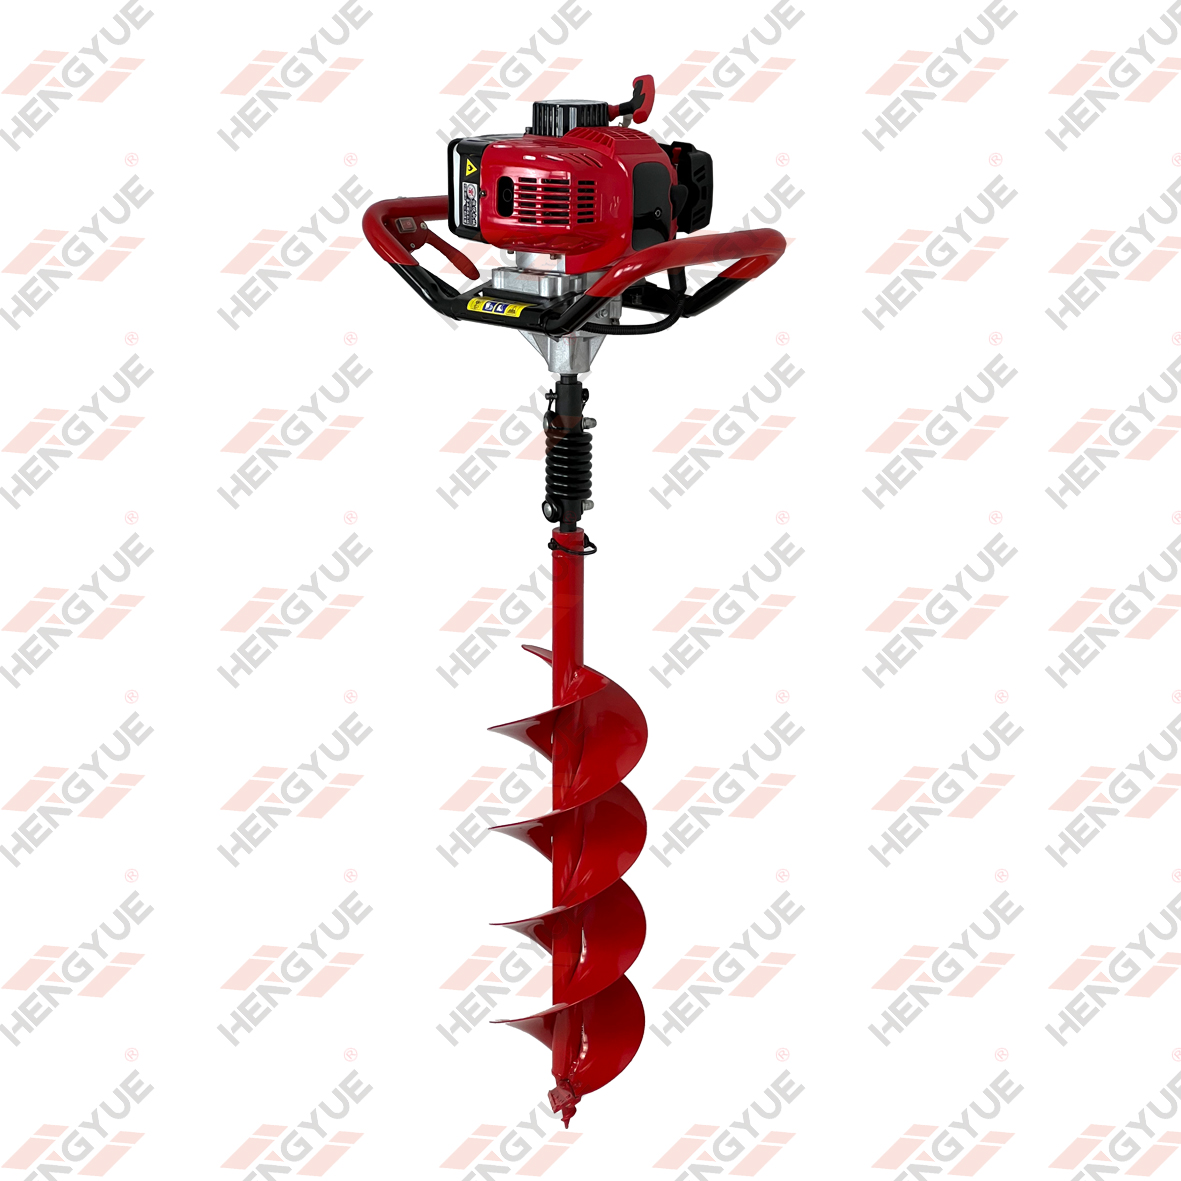 43cc Hand Held Earth Auger Drilling Machine